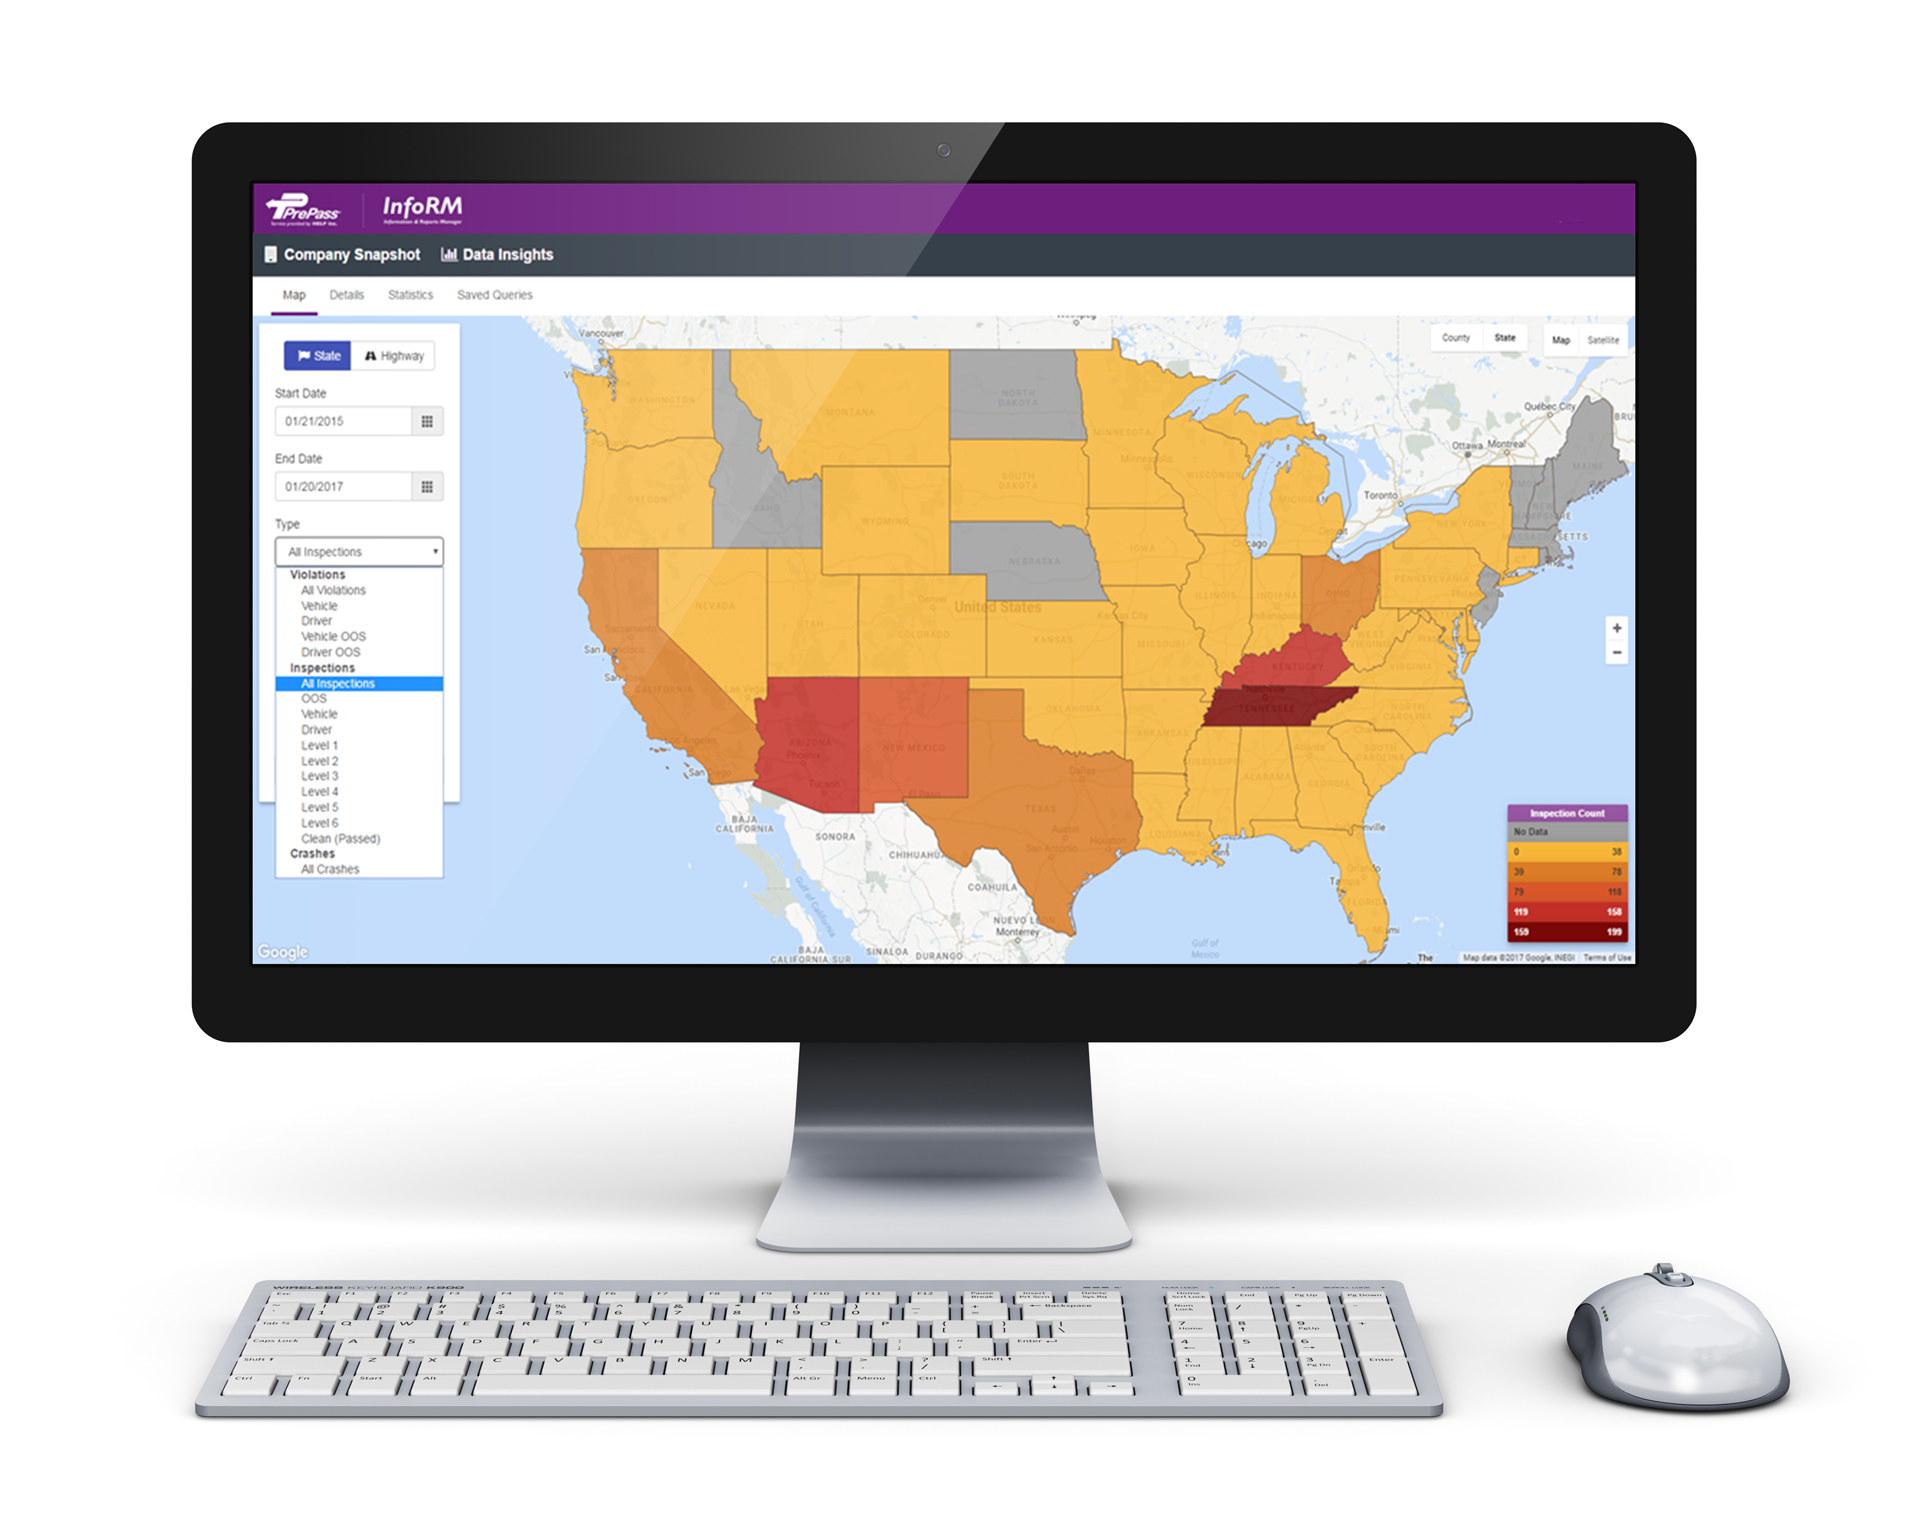 InfoRM™ provides carriers granular details about its truck inspections and safety information to quickly identify areas in need of improvement and take action.